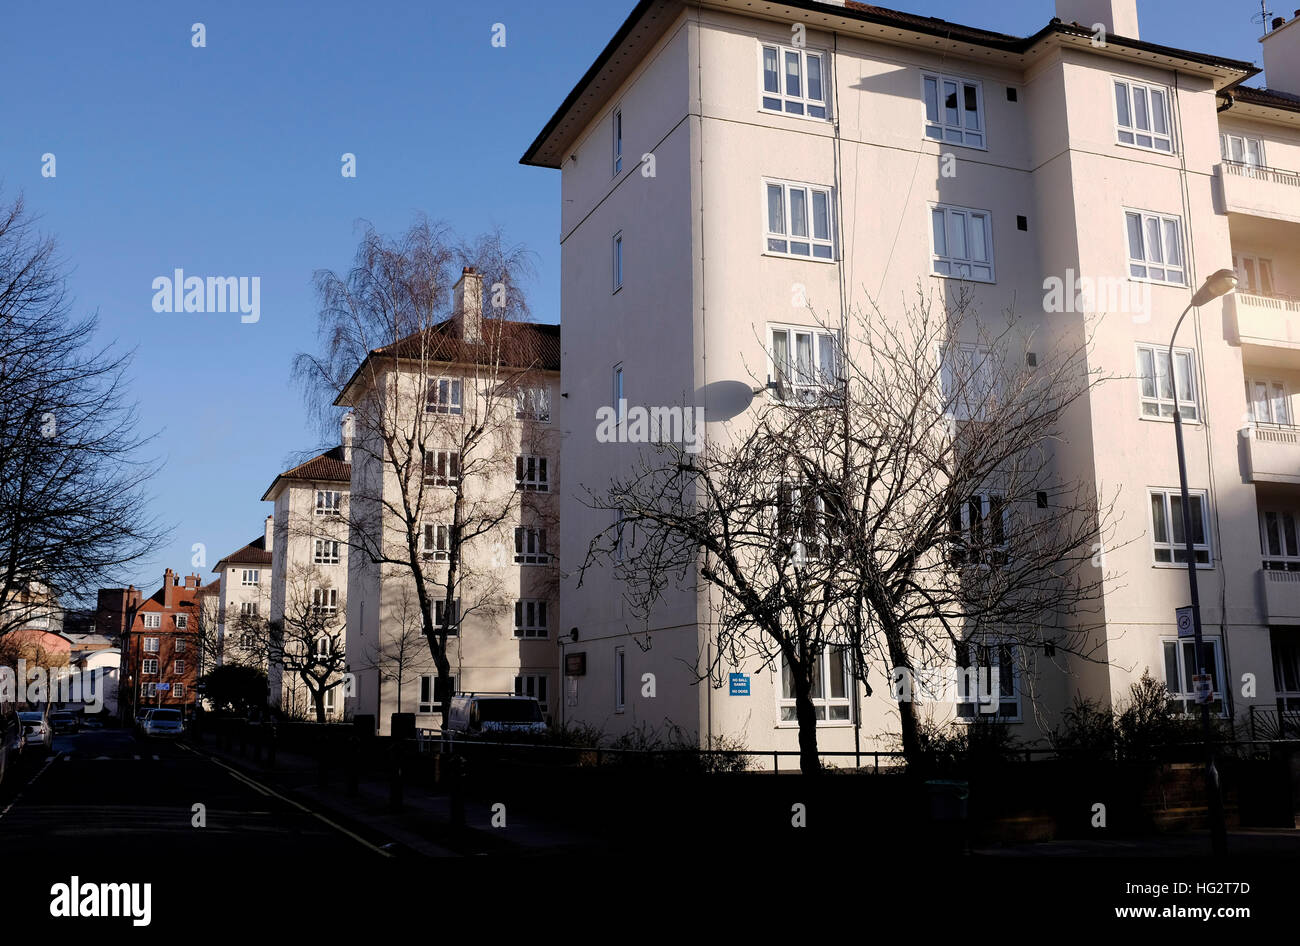 Borough of Hammersmith and Fulham in West London - Council flats Stock Photo